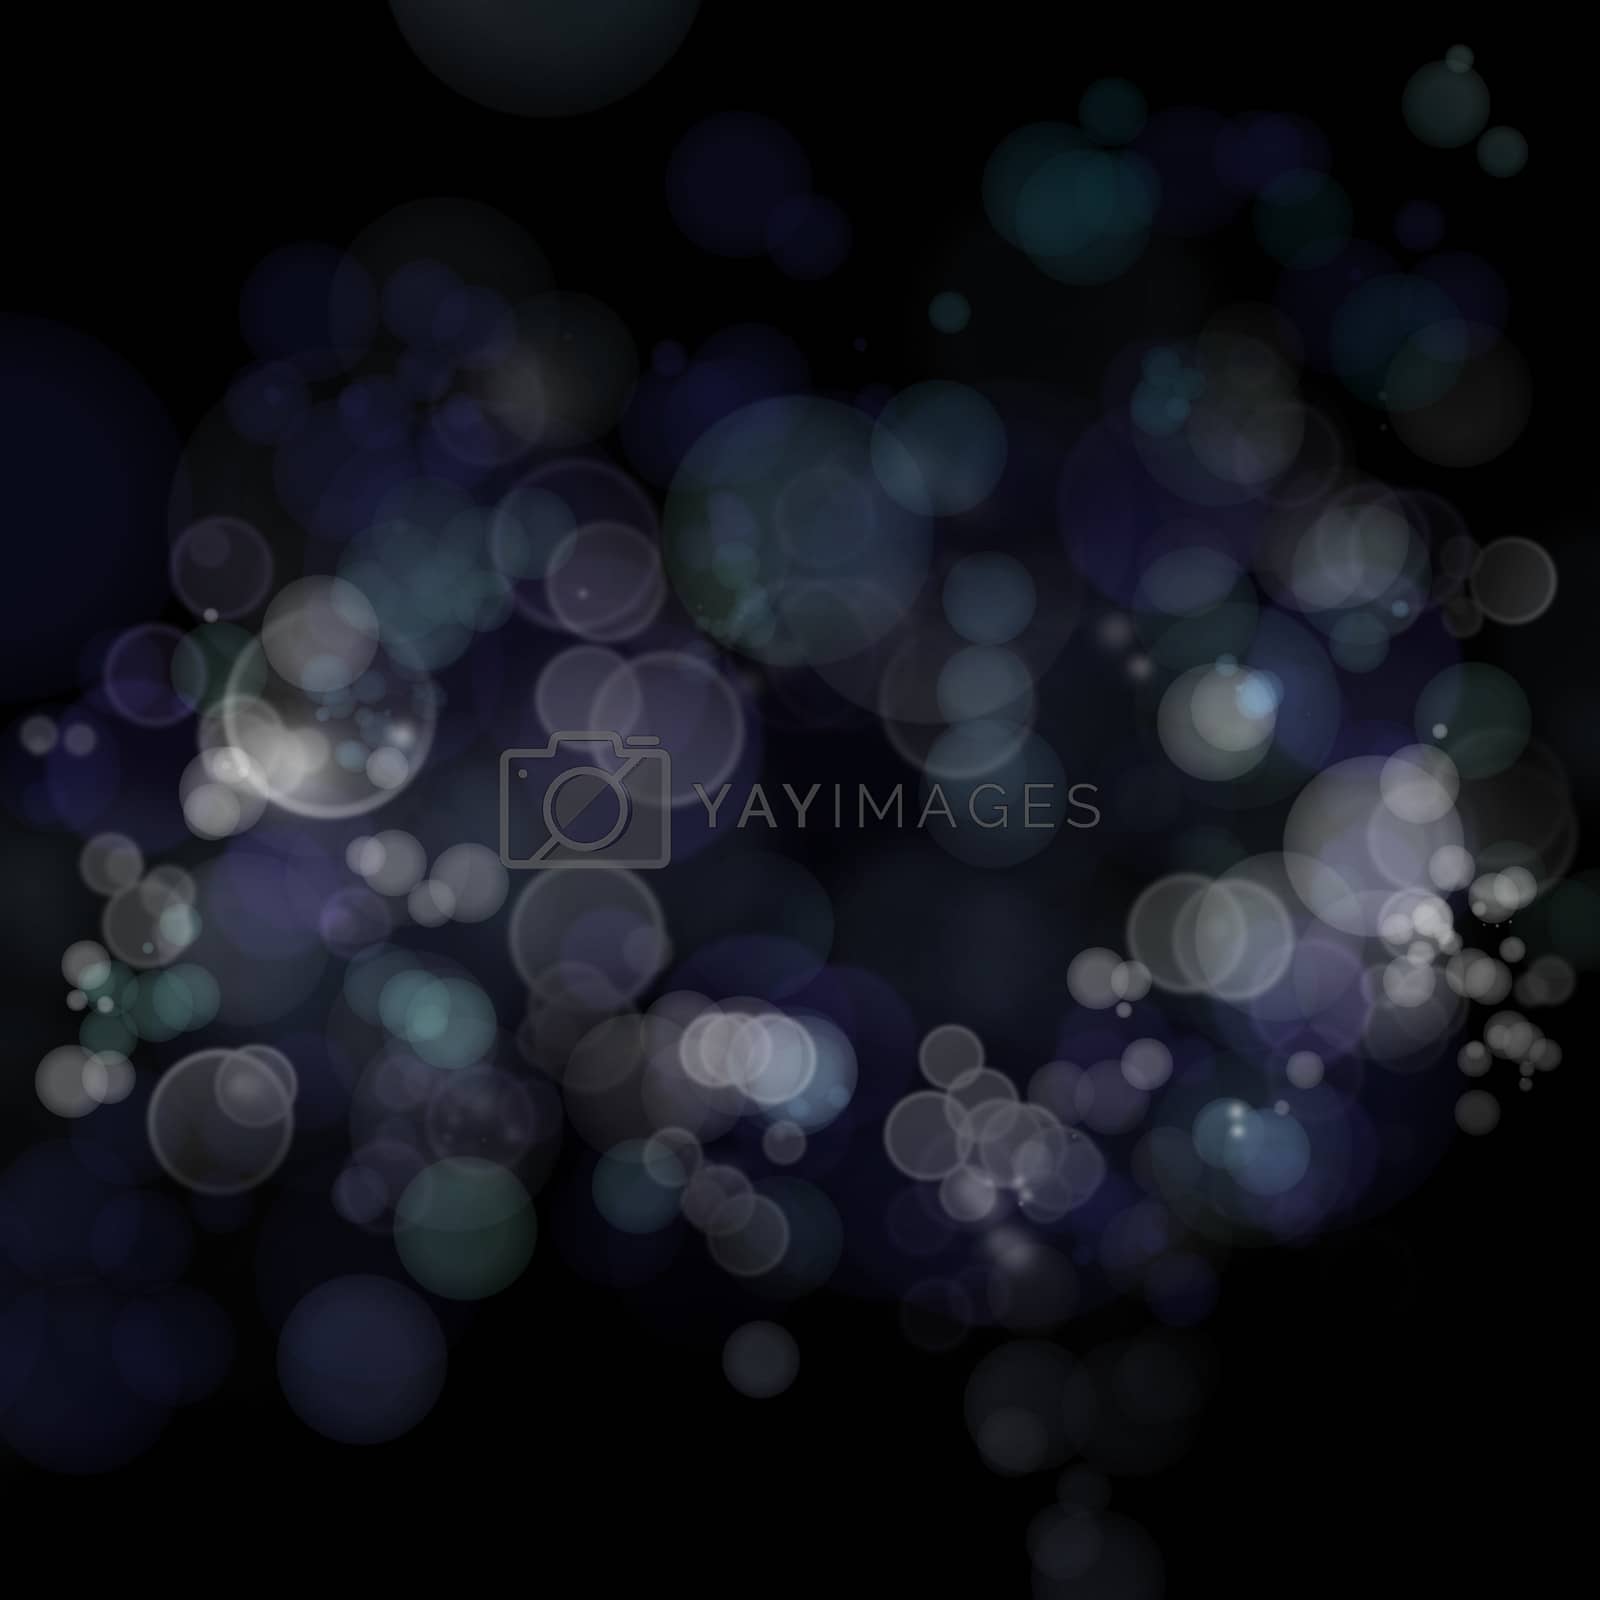 Royalty free image of Abstract background by Stillfx